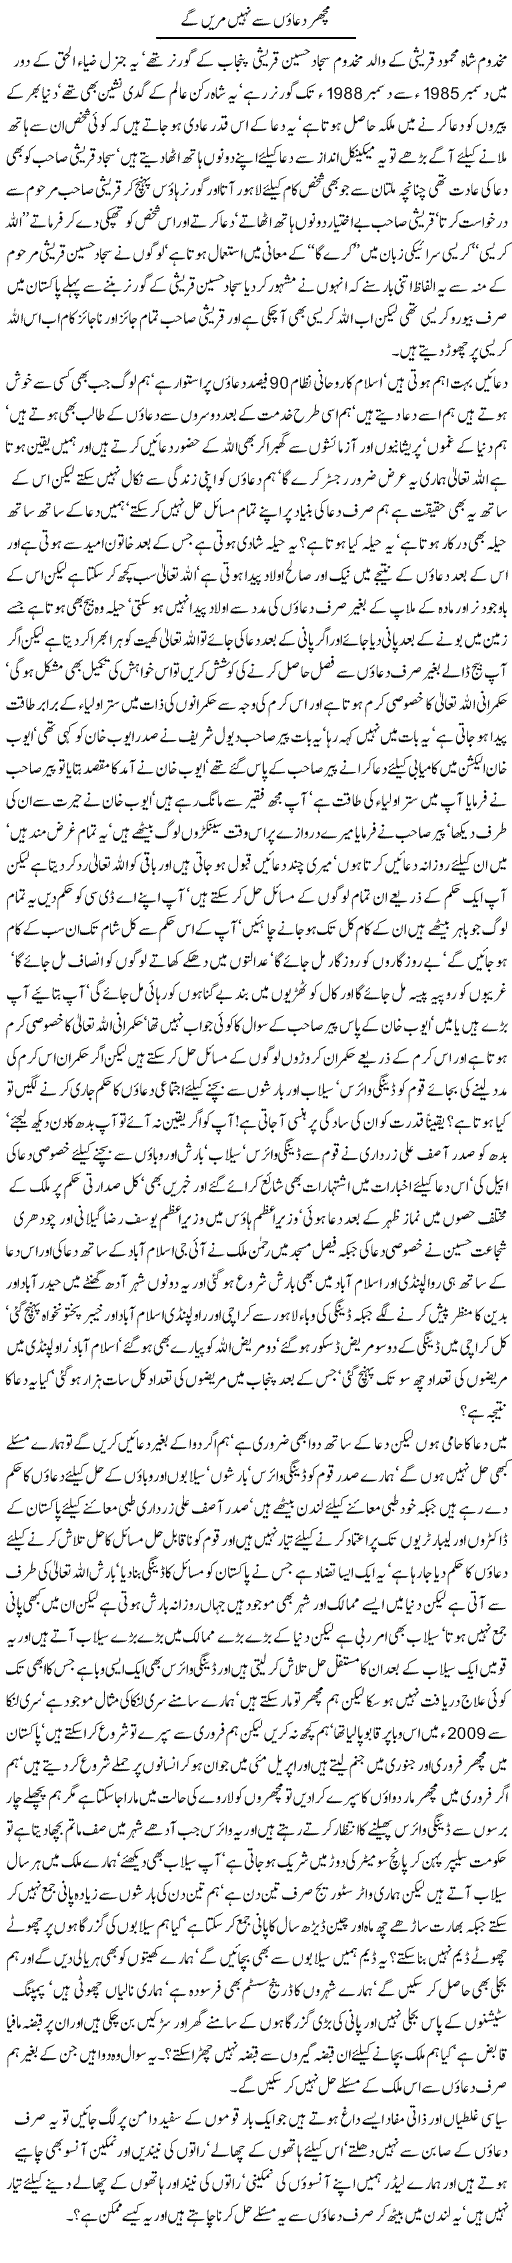 Dengue Mosquito Express Column Javed Chaudhry 16 September 2011